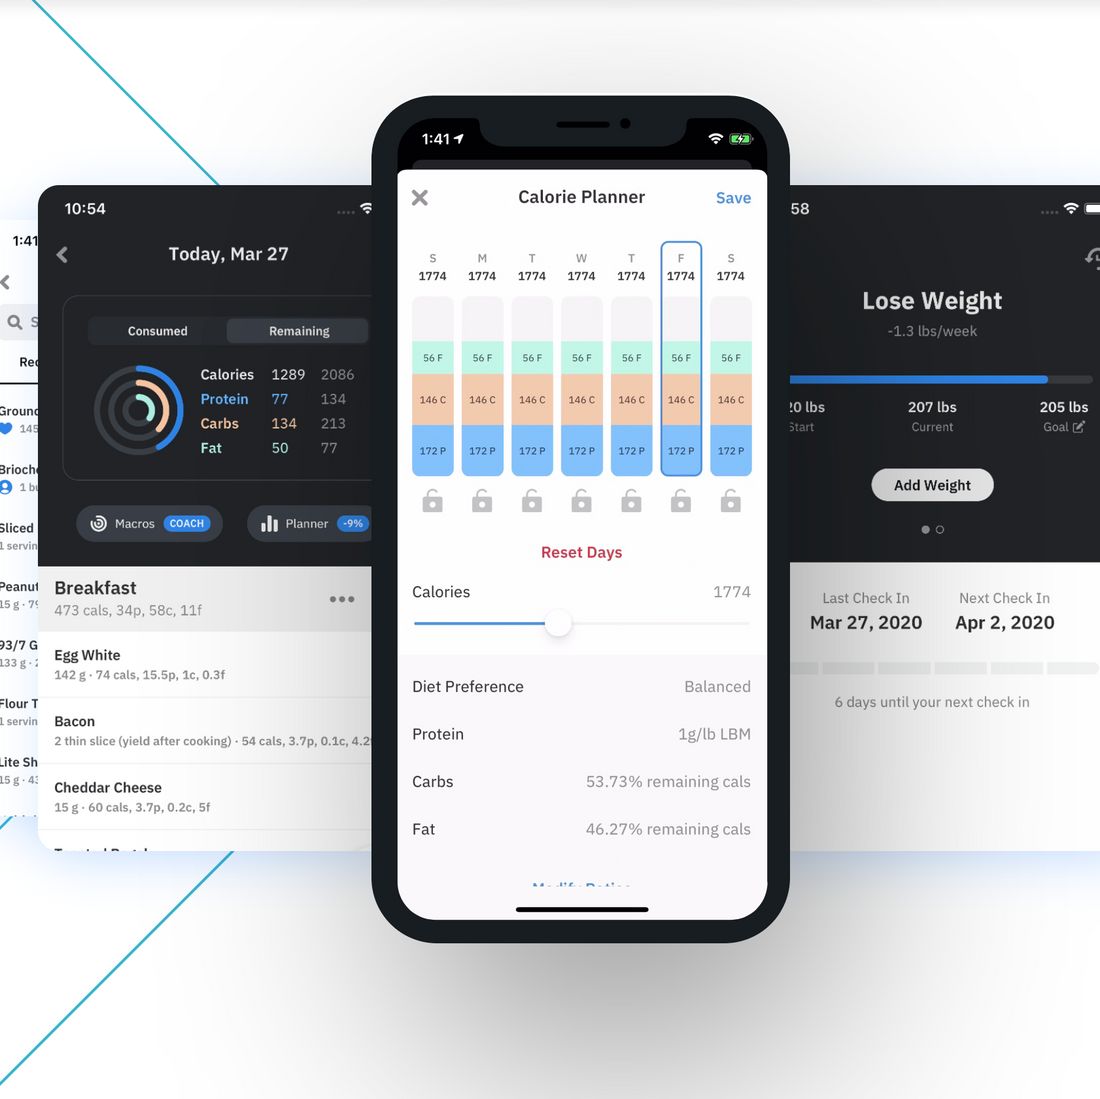 First Look: The Brand New Carbon Diet App